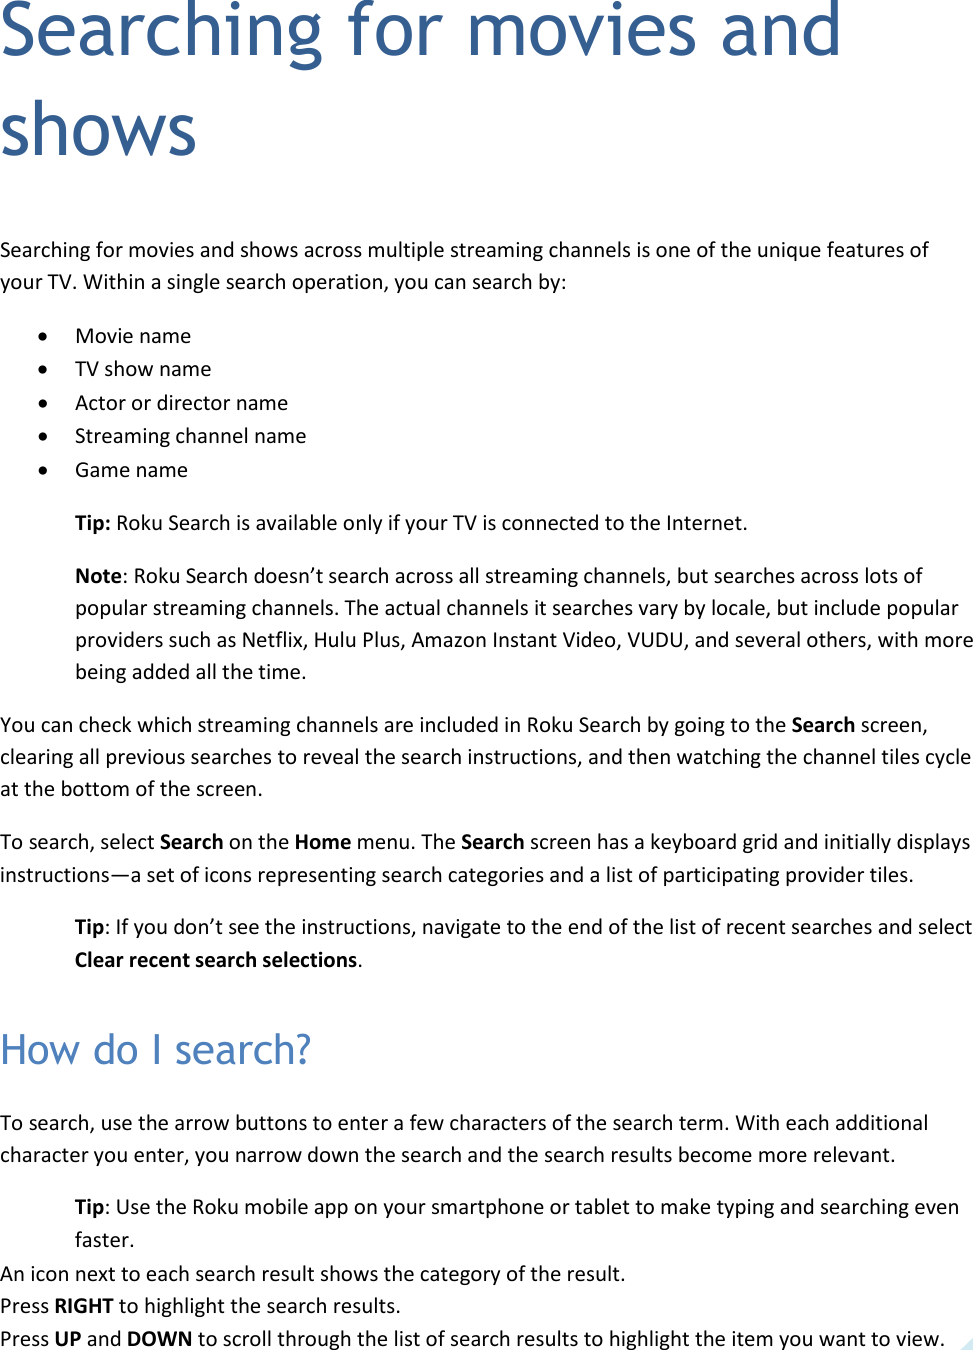   37 Searching for movies and shows Searching for movies and shows across multiple streaming channels is one of the unique features of your TV. Within a single search operation, you can search by: • Movie name • TV show name • Actor or director name • Streaming channel name • Game name Tip: Roku Search is available only if your TV is connected to the Internet. Note: Roku Search doesn’t search across all streaming channels, but searches across lots of popular streaming channels. The actual channels it searches vary by locale, but include popular providers such as Netflix, Hulu Plus, Amazon Instant Video, VUDU, and several others, with more being added all the time. You can check which streaming channels are included in Roku Search by going to the Search screen, clearing all previous searches to reveal the search instructions, and then watching the channel tiles cycle at the bottom of the screen. To search, select Search on the Home menu. The Search screen has a keyboard grid and initially displays instructions—a set of icons representing search categories and a list of participating provider tiles. Tip: If you don’t see the instructions, navigate to the end of the list of recent searches and select Clear recent search selections. How do I search? To search, use the arrow buttons to enter a few characters of the search term. With each additional character you enter, you narrow down the search and the search results become more relevant. Tip: Use the Roku mobile app on your smartphone or tablet to make typing and searching even faster. An icon next to each search result shows the category of the result.  Press RIGHT to highlight the search results. Press UP and DOWN to scroll through the list of search results to highlight the item you want to view. 